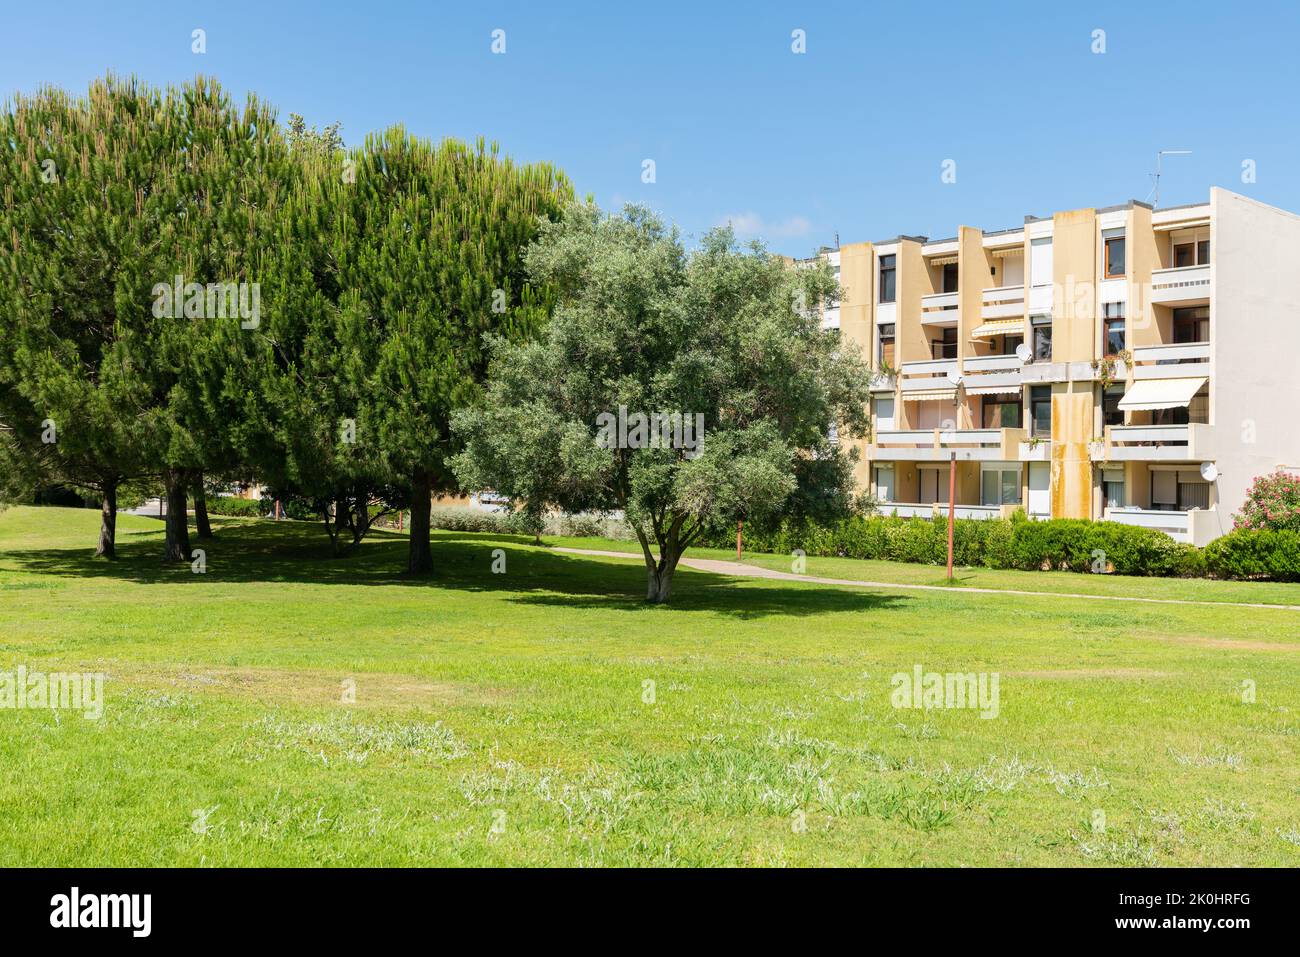 The garden of Troia covered with green trees and apartment complexes, Grandola municipality, Portugal Stock Photo